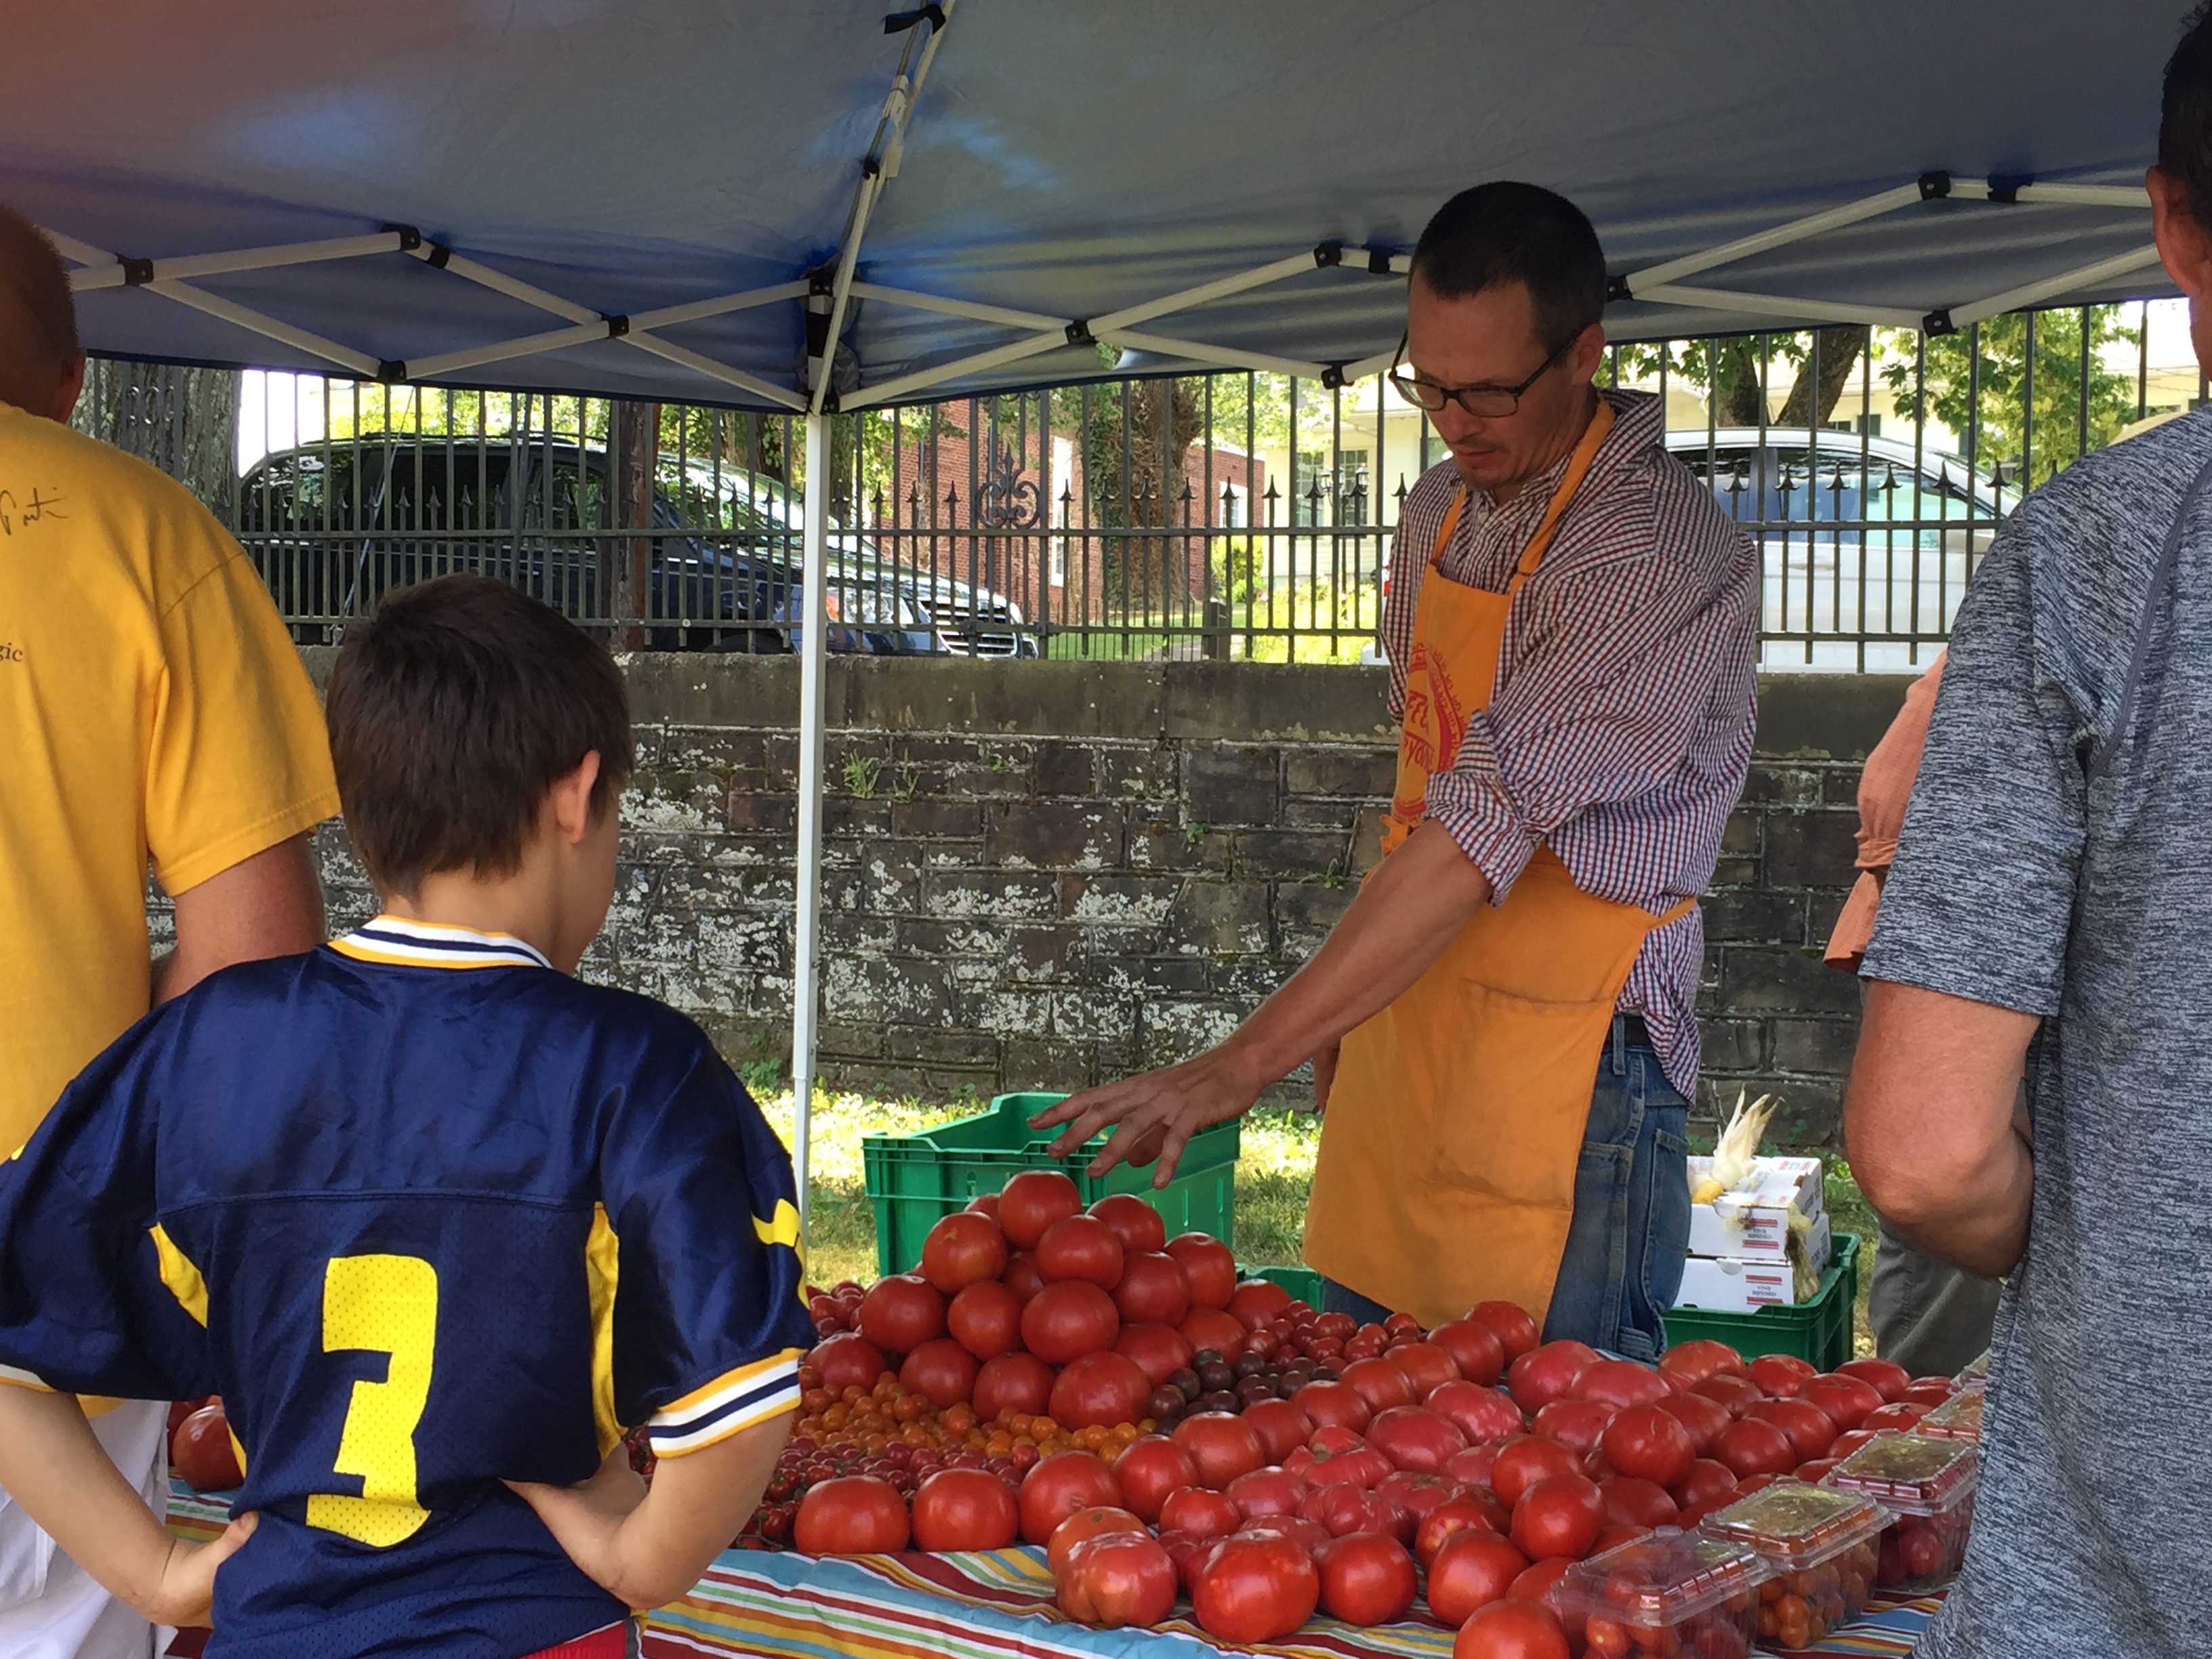 man standing behind a table with lots of red tomatoes talking to a young boy